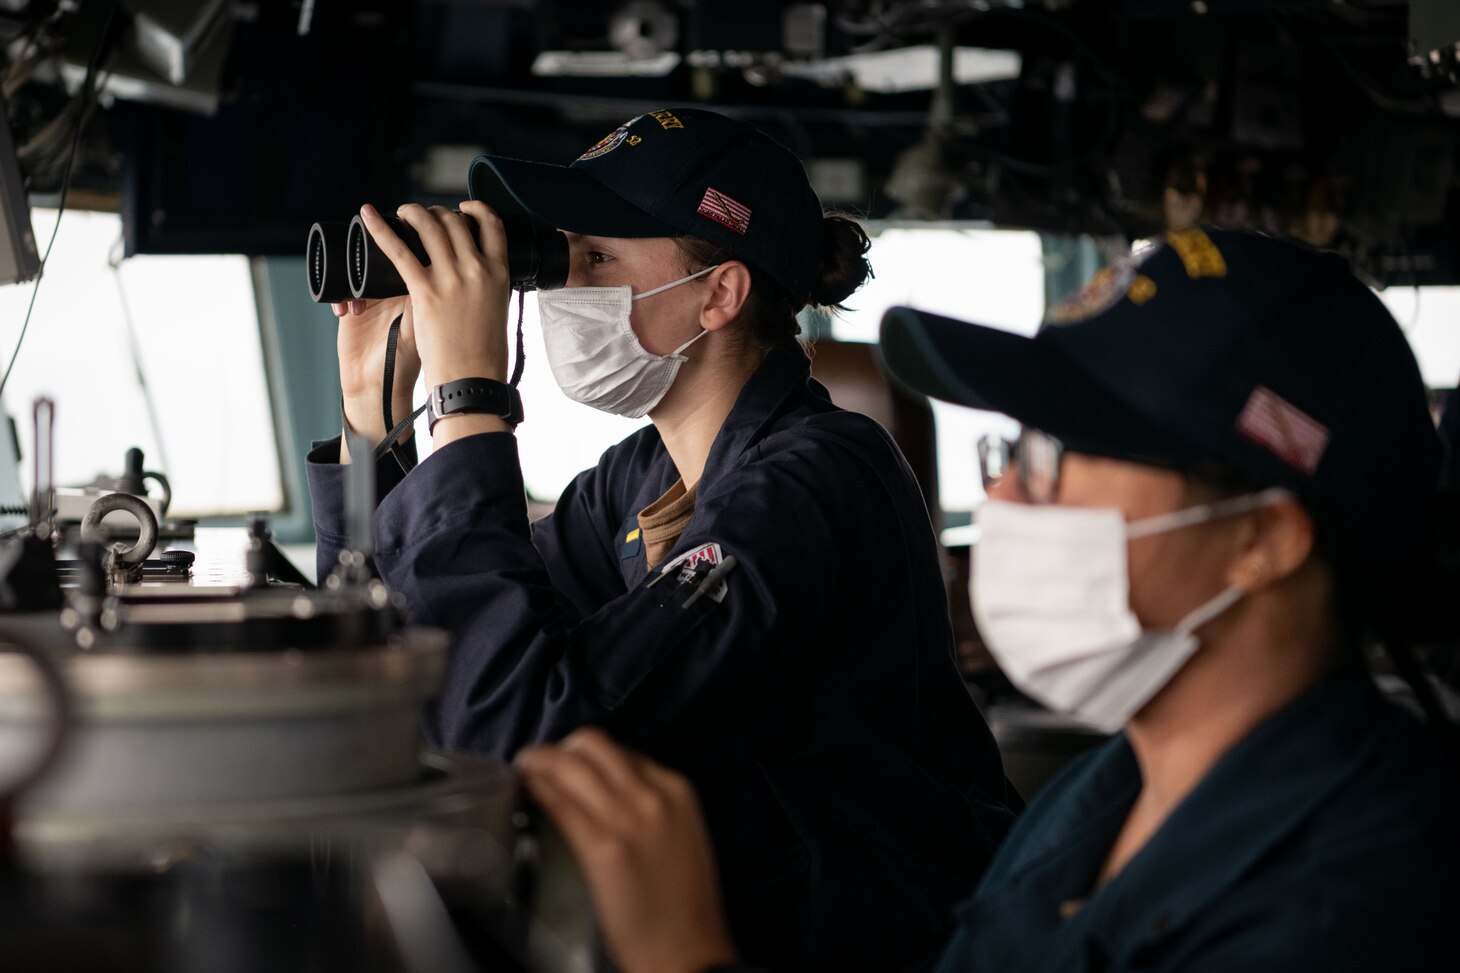 TAIWAN STRAIT (Nov. 20, 2020) – Ensign Antonia Vinci, from St. Petersburg, Fla., scans the horizon for contacts on the bridge of the guided-missile destroyer USS Barry (DDG 62) as the ship conducts routine underway operations in the Taiwan Strait. Barry is assigned to Destroyer Squadron (DESRON) 15, the Navy’s largest forward-deployed DESRON and the U.S. 7th Fleet's principal surface force, forward-deployed to the U.S. 7th Fleet area of operations in support of a free and open Indo-Pacific. (U.S. Navy photo by Lieutenant Junior Grade Samuel Hardgrove)